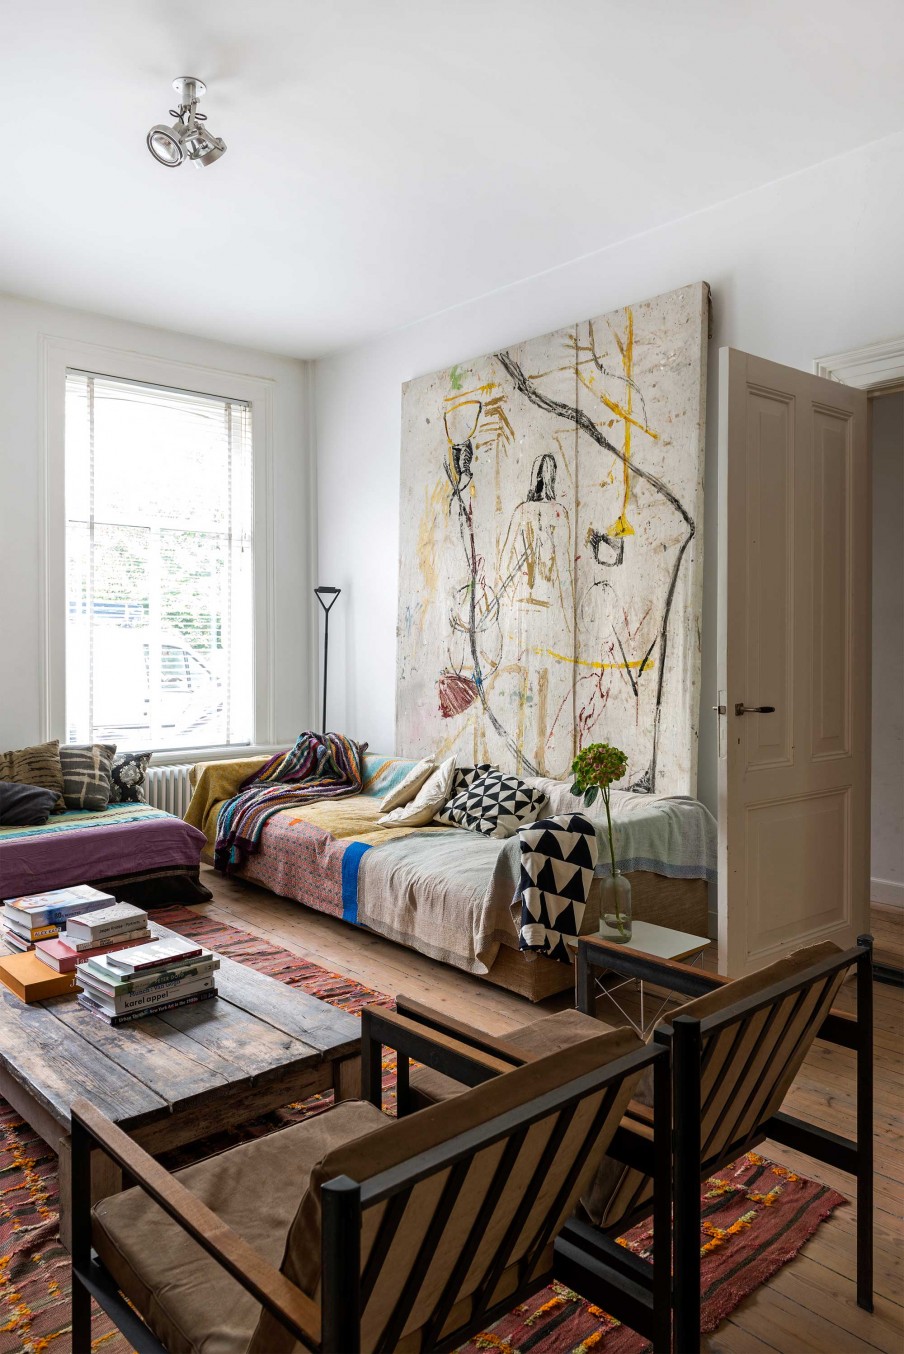 The living room has leather chairs, artworks of the owner and bold boho textiles, it's eclectic